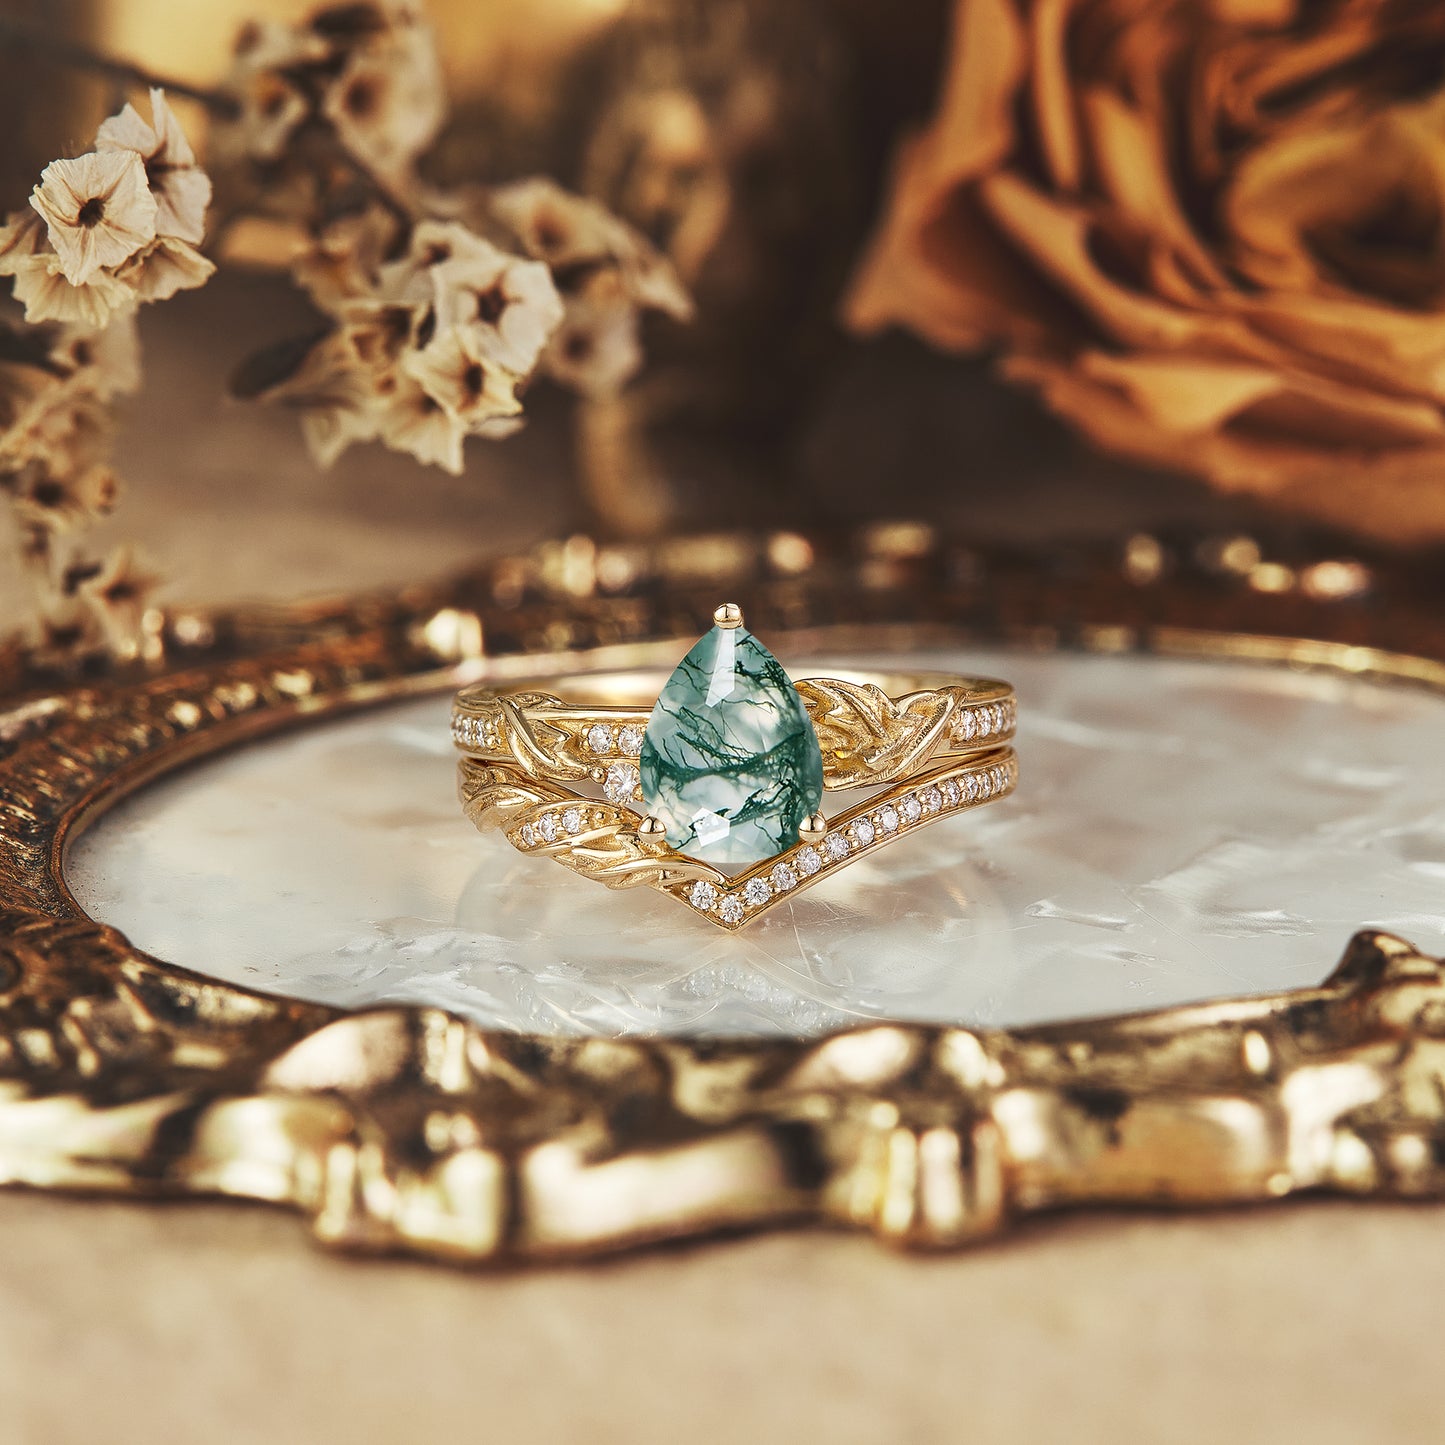 Asymmetric Pear Shape Moss Agate Engagement Ring - Avery2.0